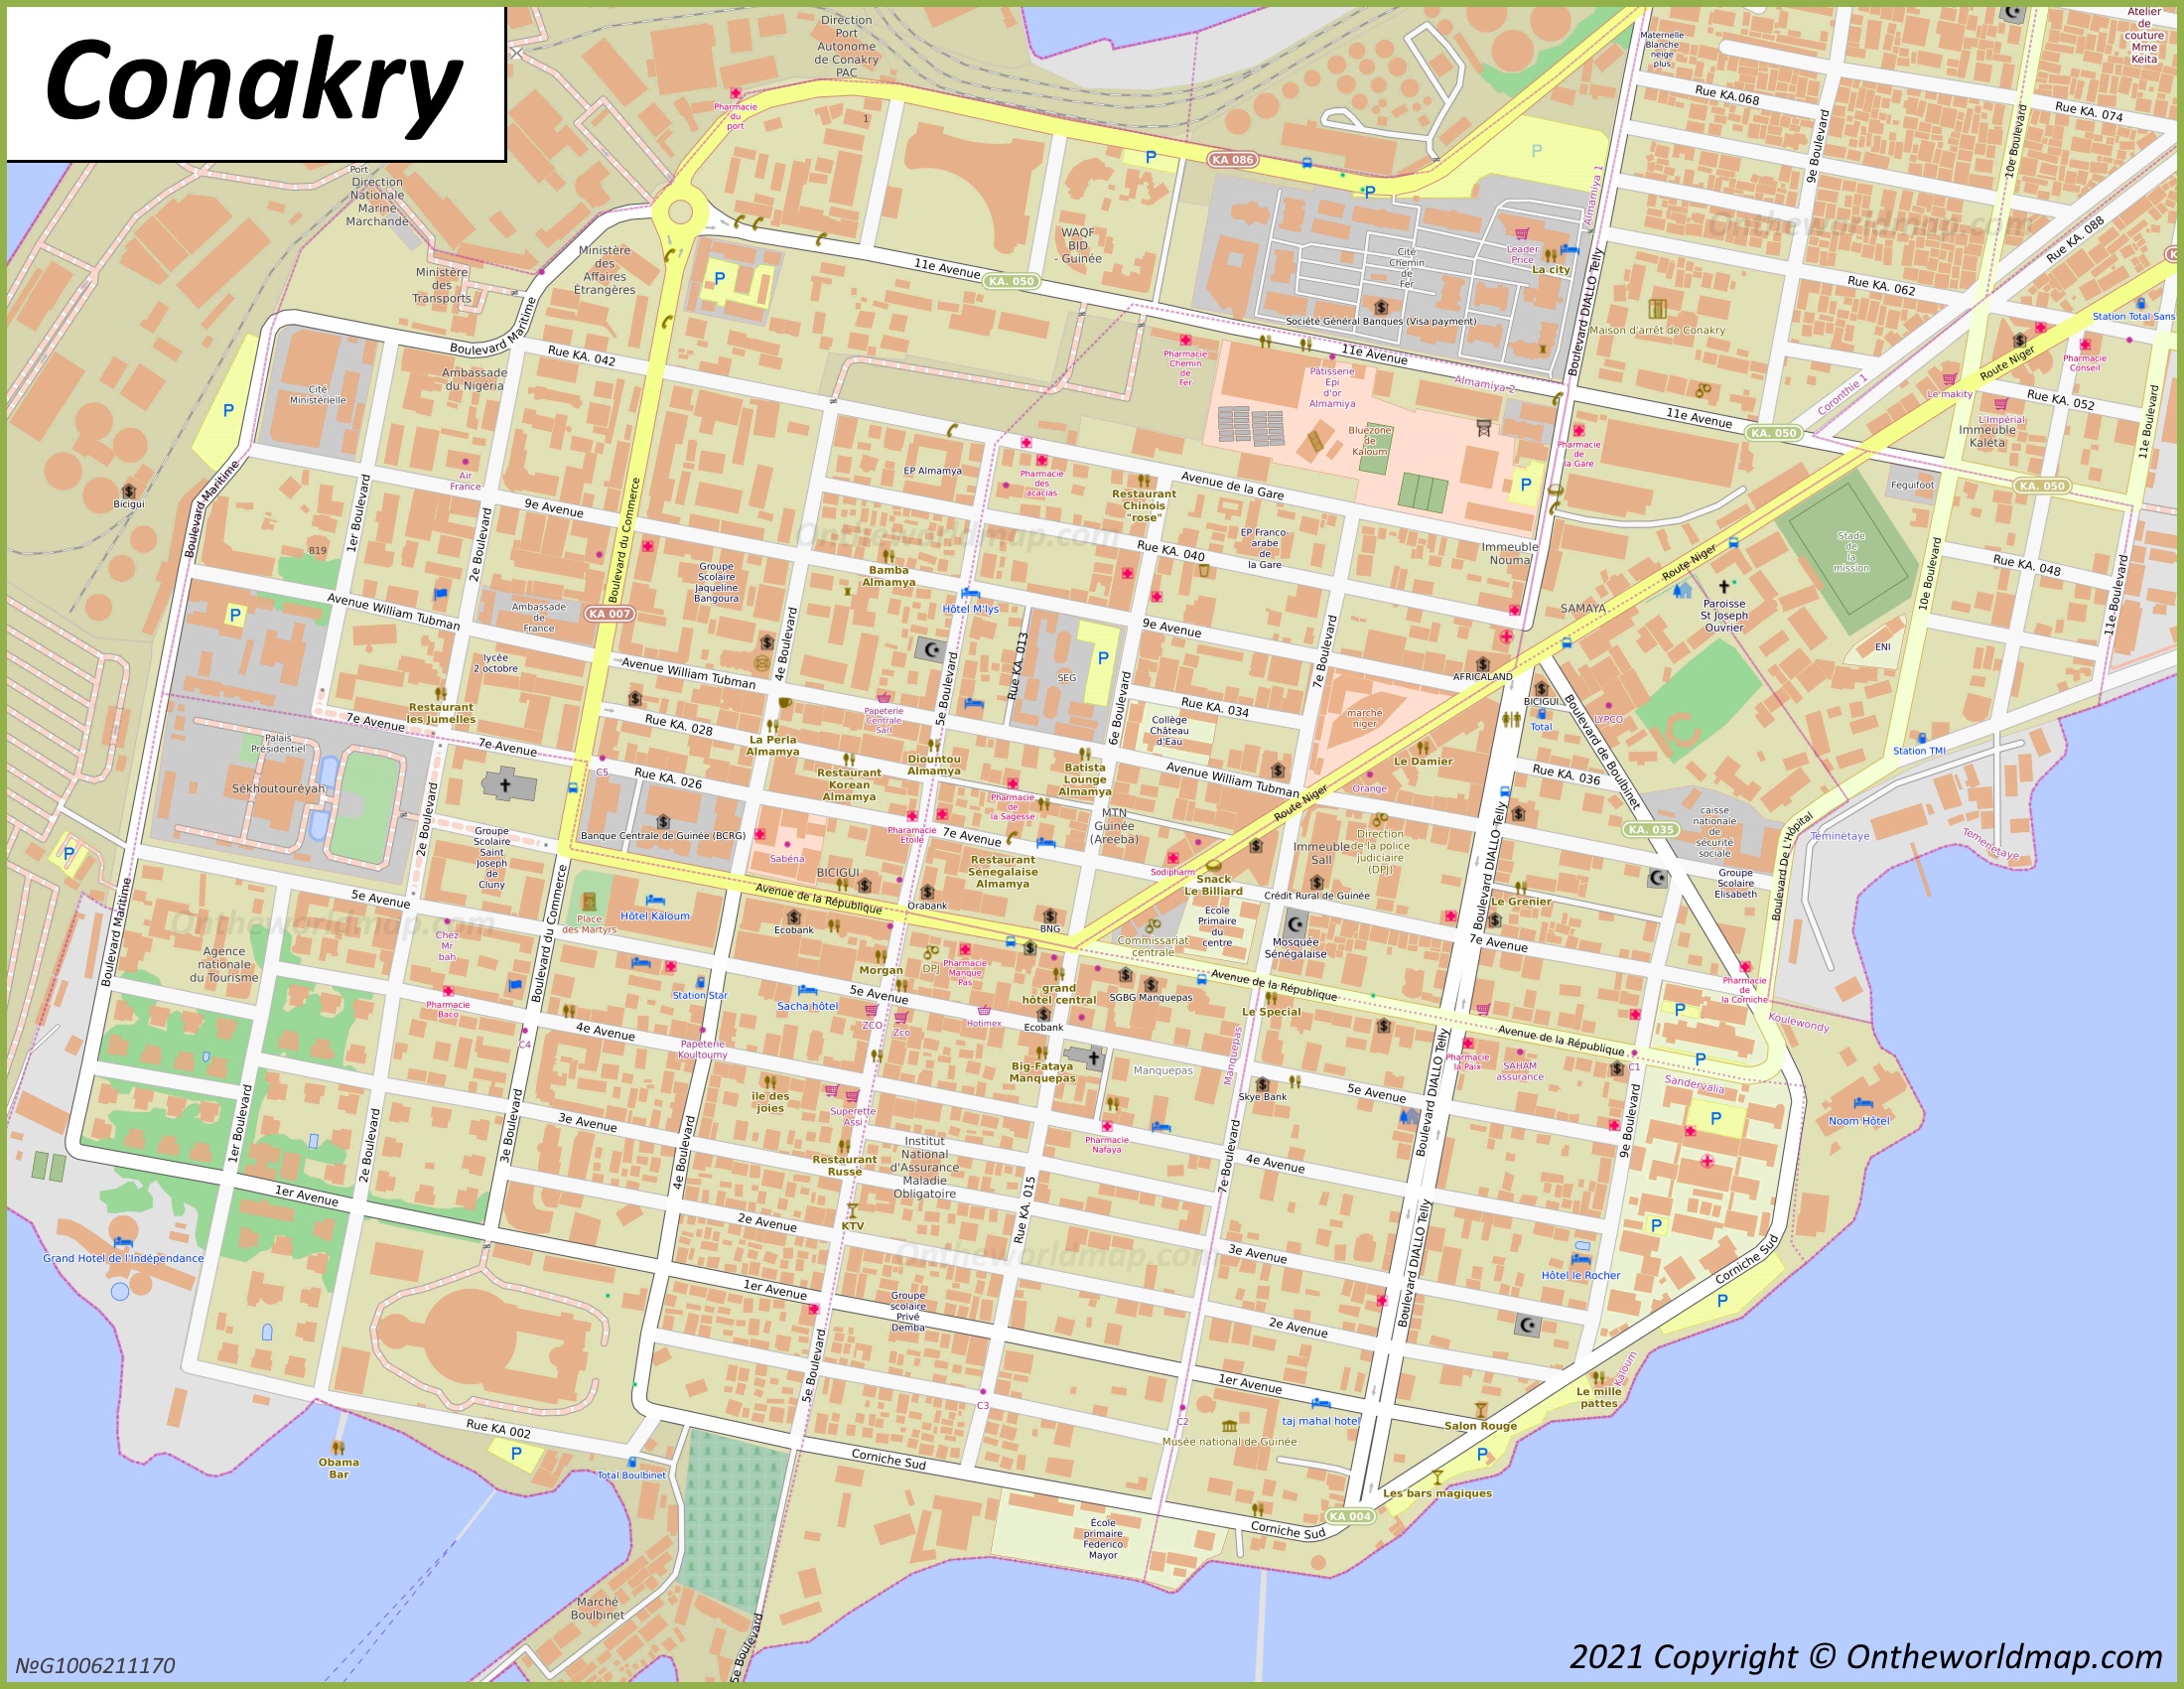 Conakry City Center Map